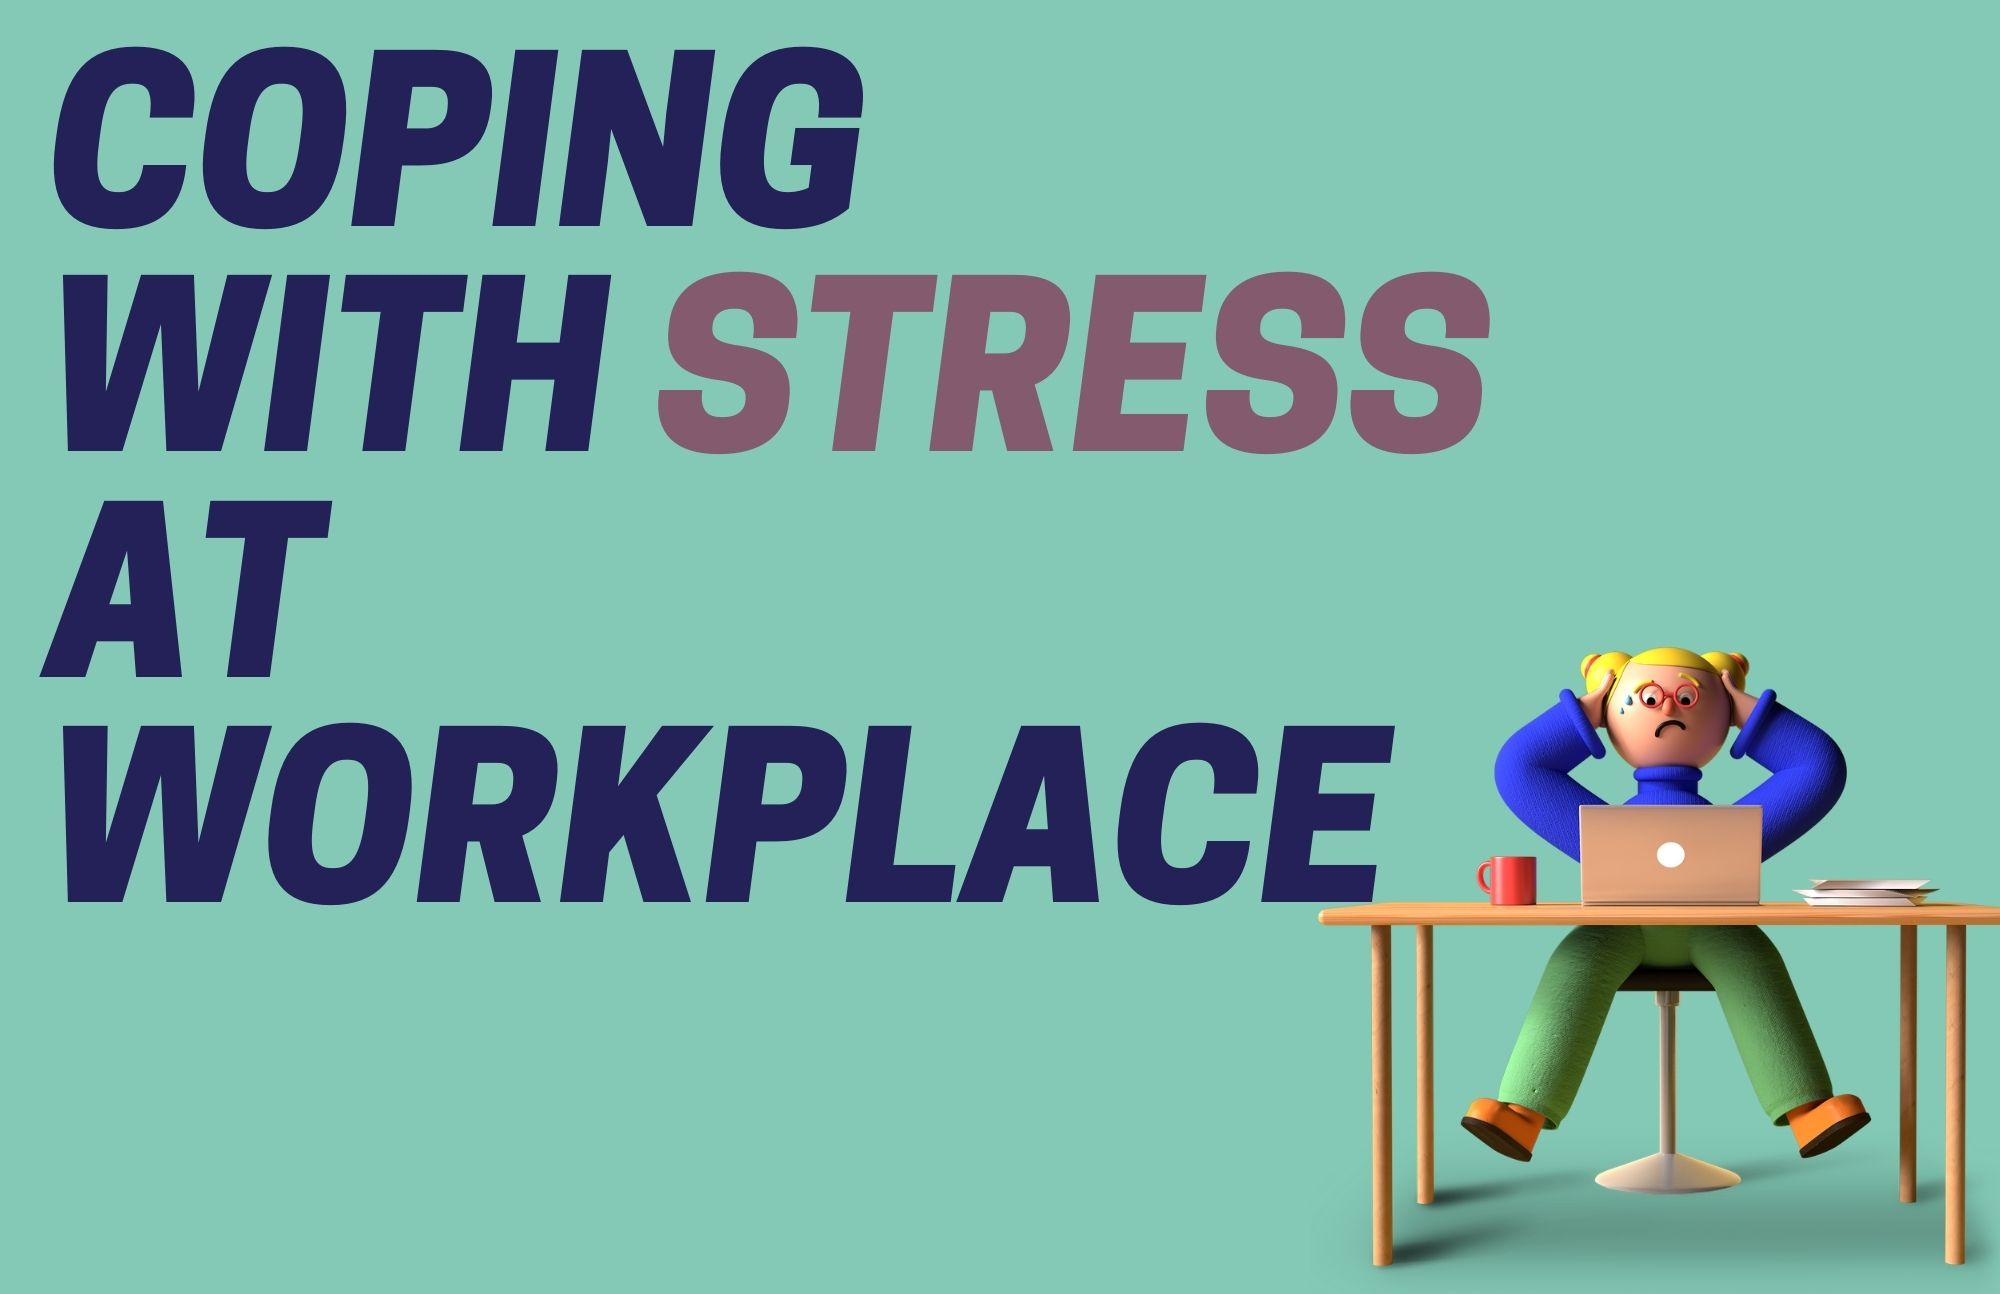 Stress At Workplace